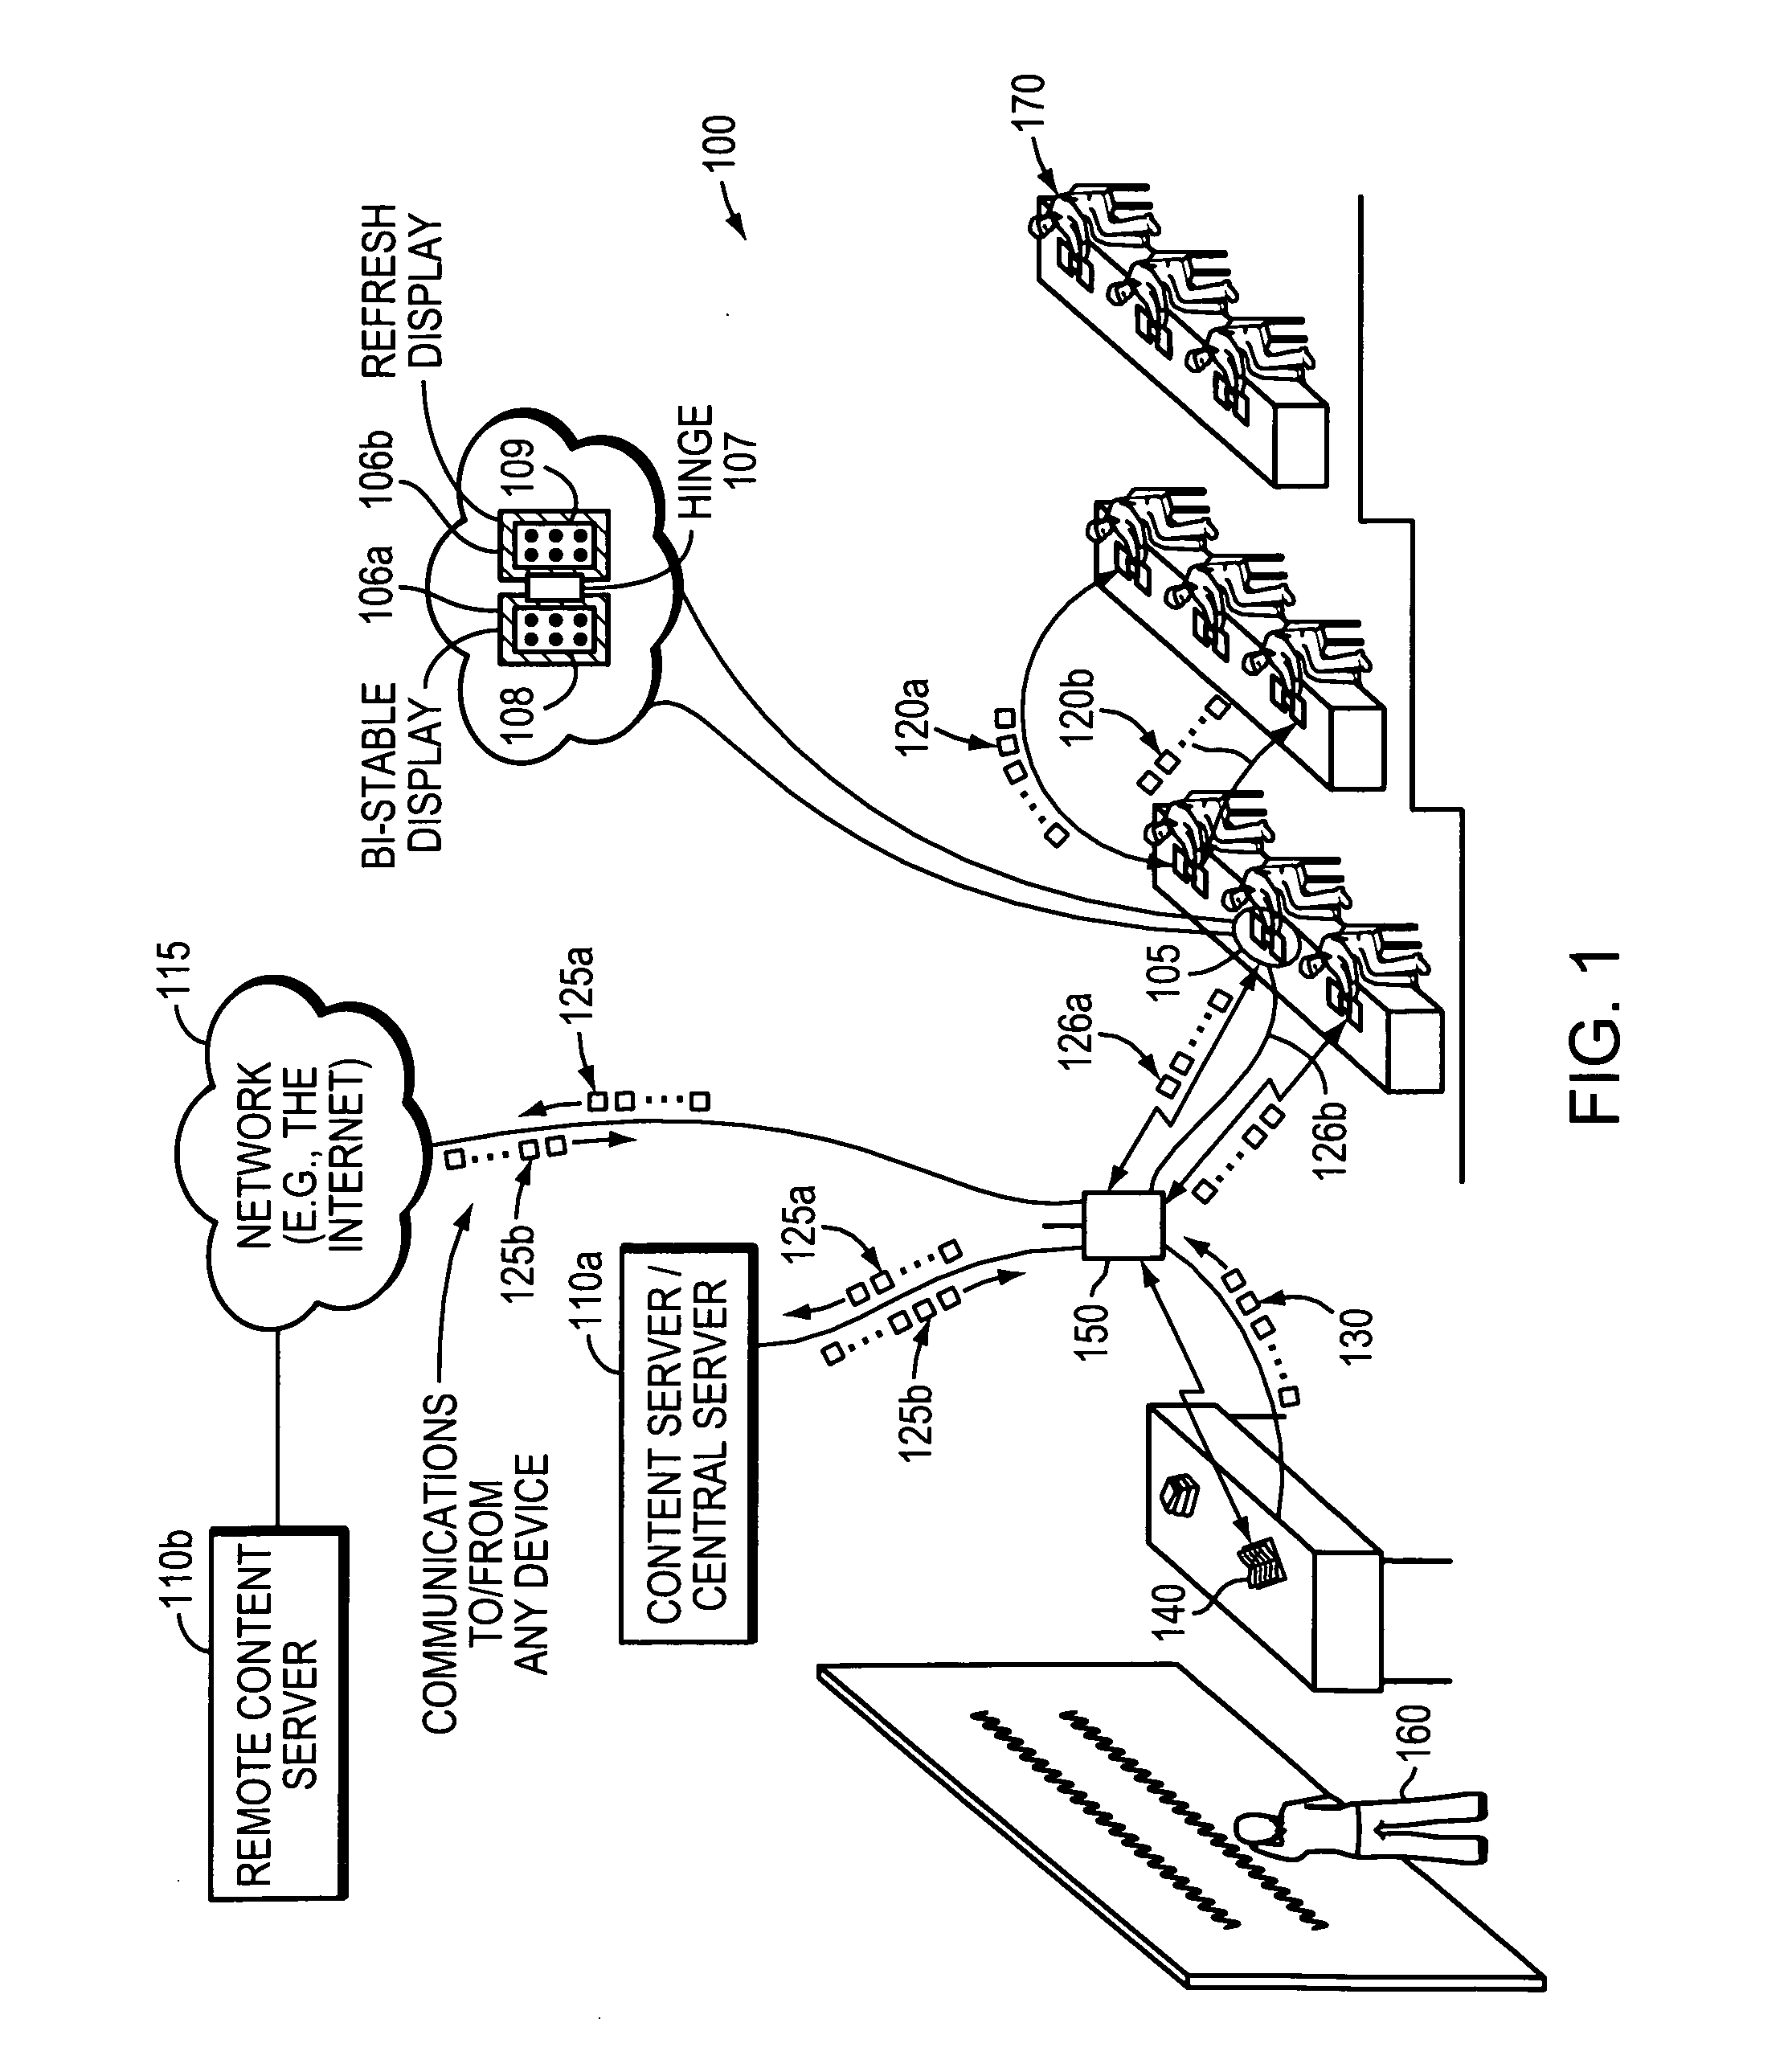 Multi-display handheld device and supporting system